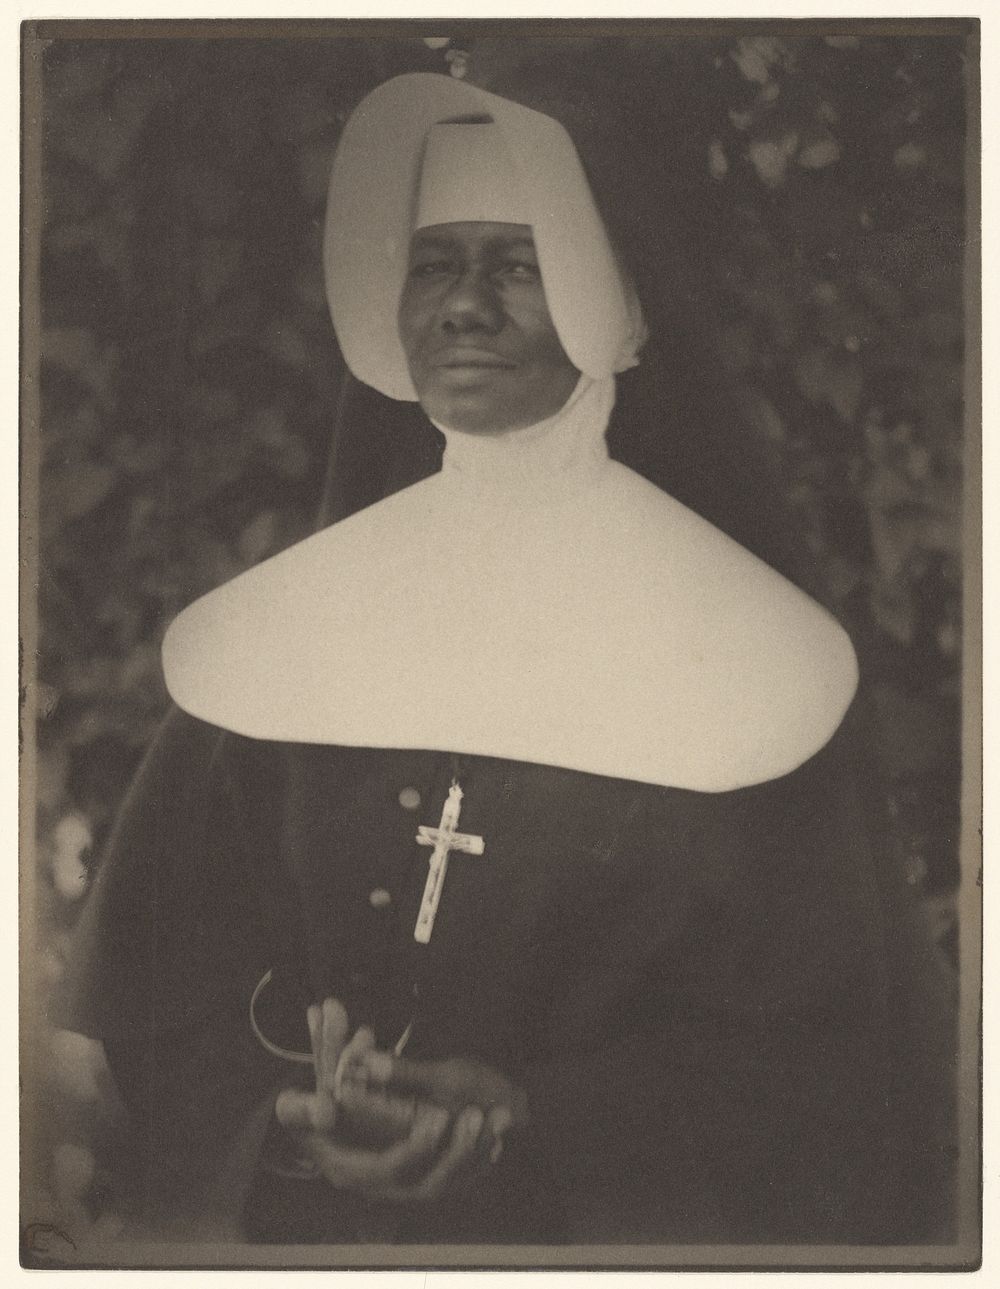 Sister Mary Paul Lewis, a Sister of the Order of the Holy Family, New Orleans by Doris Ulmann